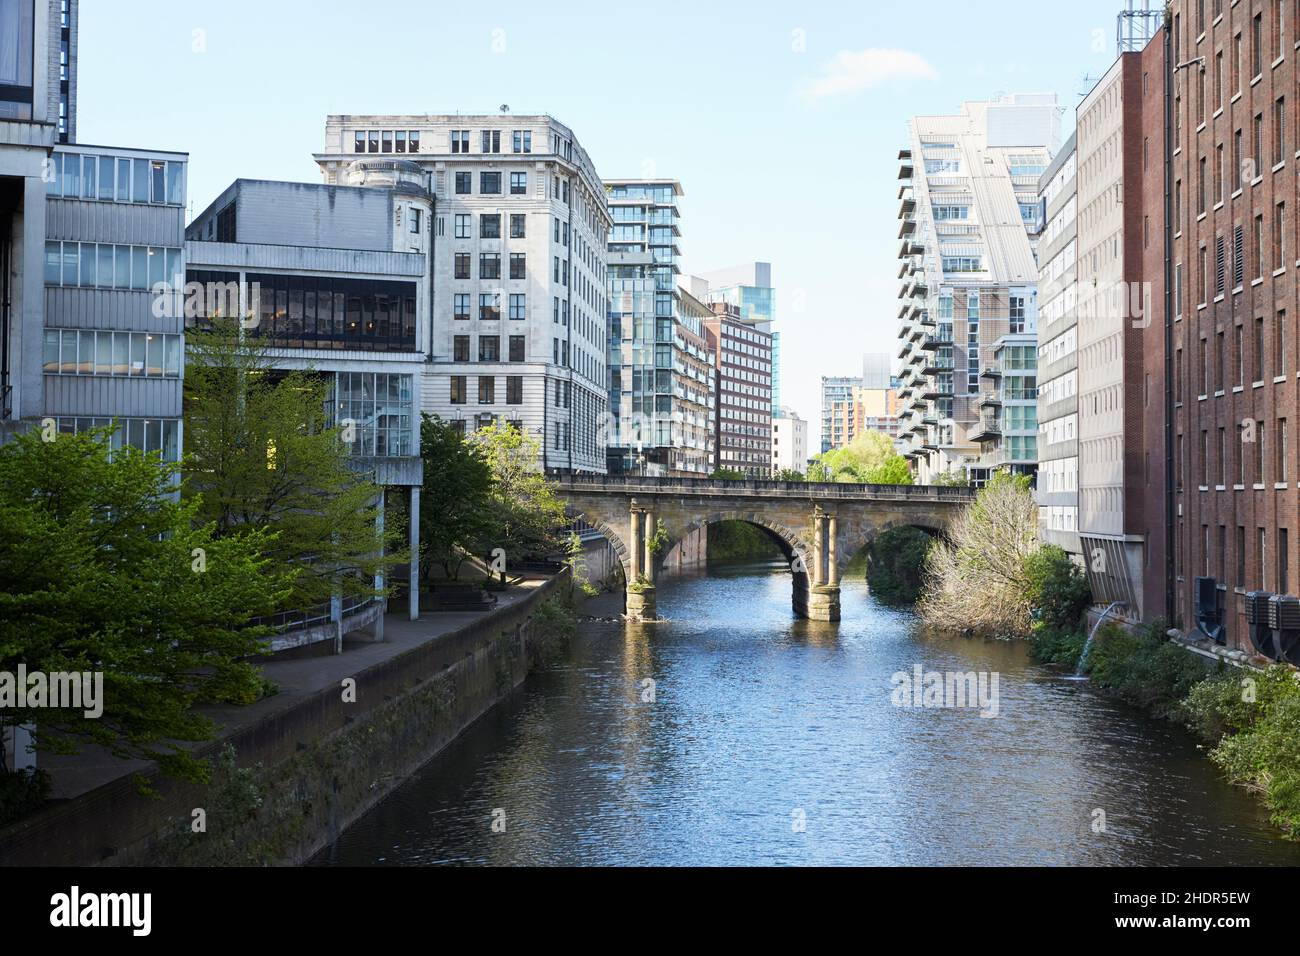 manchester, river irwell, manchesters Stock Photo